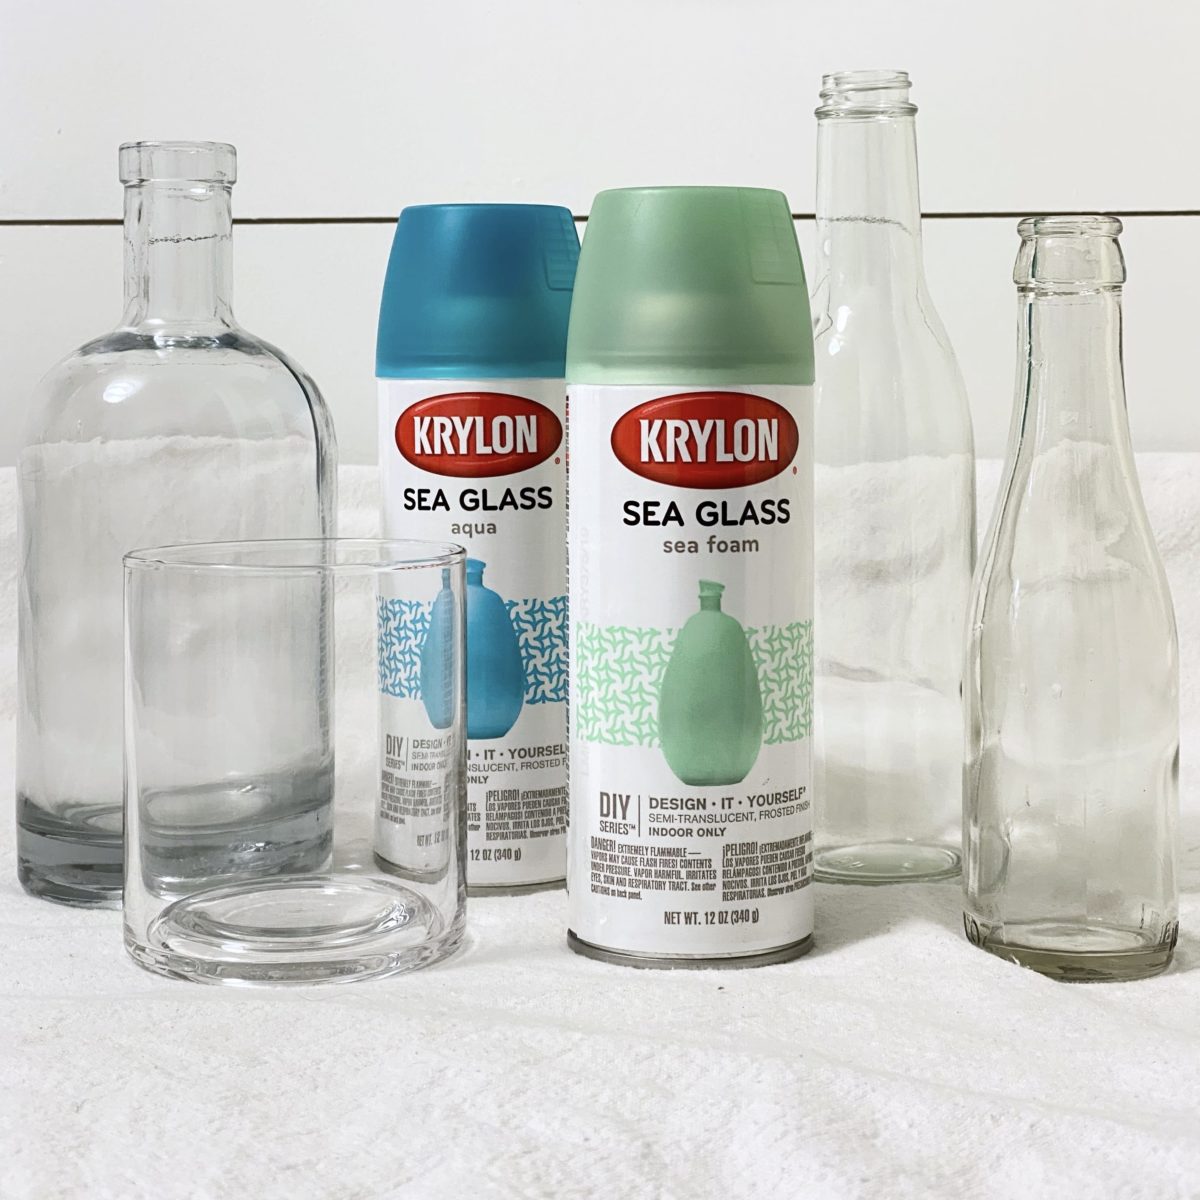 Glass bottles and sea glass spray paint to make DIY sea glass bottles.